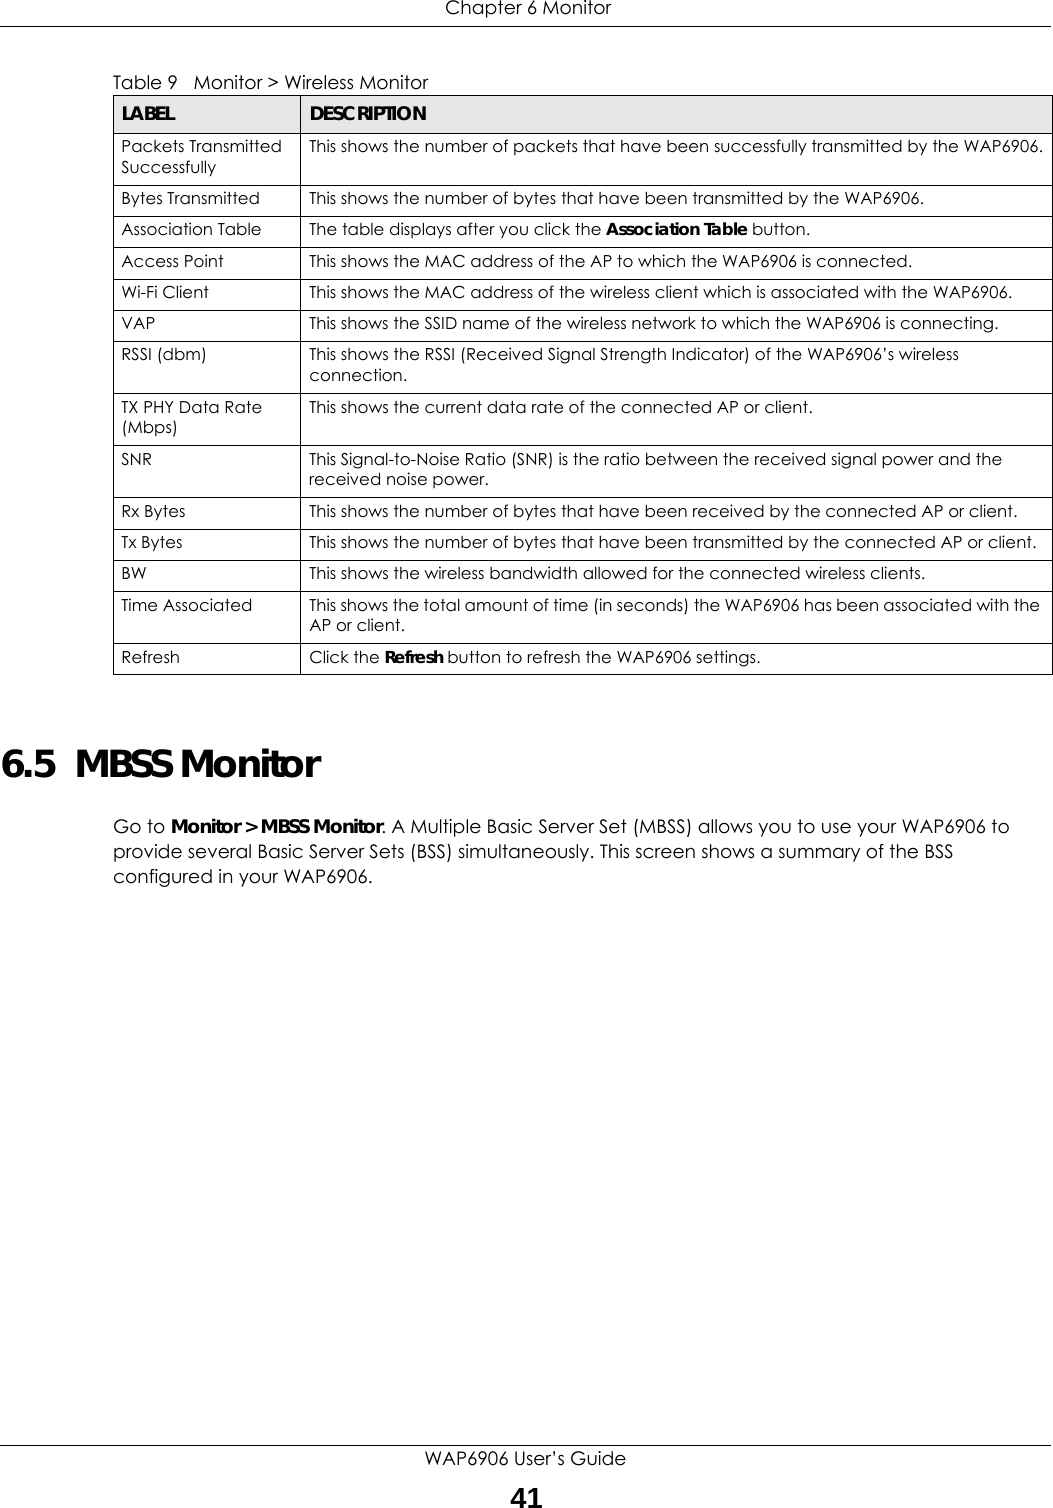  Chapter 6 MonitorWAP6906 User’s Guide416.5  MBSS MonitorGo to Monitor &gt; MBSS Monitor. A Multiple Basic Server Set (MBSS) allows you to use your WAP6906 to provide several Basic Server Sets (BSS) simultaneously. This screen shows a summary of the BSS configured in your WAP6906.Packets Transmitted SuccessfullyThis shows the number of packets that have been successfully transmitted by the WAP6906.Bytes Transmitted This shows the number of bytes that have been transmitted by the WAP6906.Association Table The table displays after you click the Association Table button.Access Point This shows the MAC address of the AP to which the WAP6906 is connected.Wi-Fi Client This shows the MAC address of the wireless client which is associated with the WAP6906.VAP This shows the SSID name of the wireless network to which the WAP6906 is connecting.RSSI (dbm) This shows the RSSI (Received Signal Strength Indicator) of the WAP6906’s wireless connection.TX PHY Data Rate (Mbps)This shows the current data rate of the connected AP or client.SNR This Signal-to-Noise Ratio (SNR) is the ratio between the received signal power and the received noise power.Rx Bytes This shows the number of bytes that have been received by the connected AP or client.Tx Bytes This shows the number of bytes that have been transmitted by the connected AP or client.BW This shows the wireless bandwidth allowed for the connected wireless clients.Time Associated This shows the total amount of time (in seconds) the WAP6906 has been associated with the AP or client.Refresh Click the Refresh button to refresh the WAP6906 settings.Table 9   Monitor &gt; Wireless MonitorLABEL DESCRIPTION